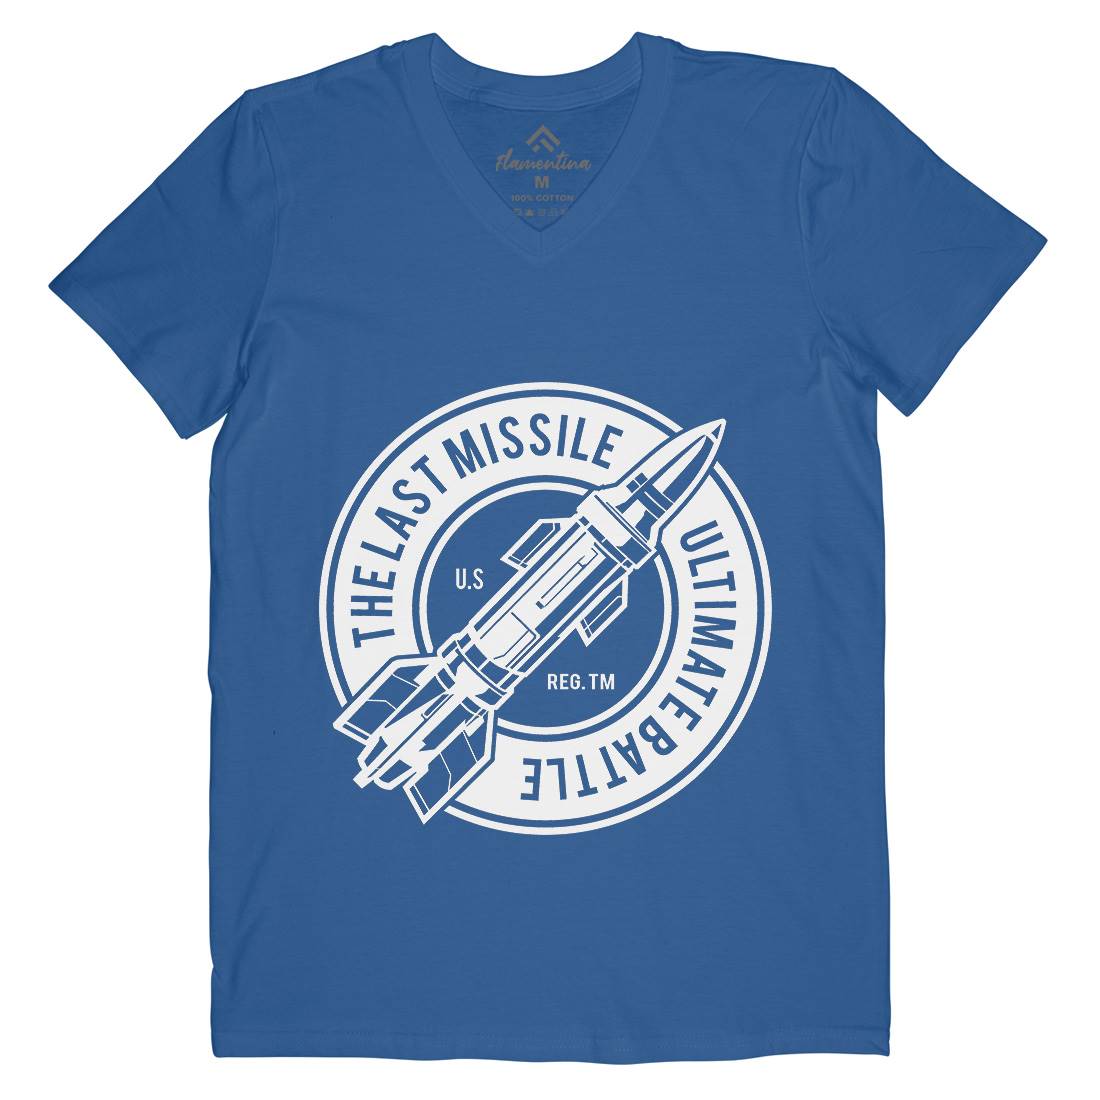 Last Missile Mens V-Neck T-Shirt Army A175